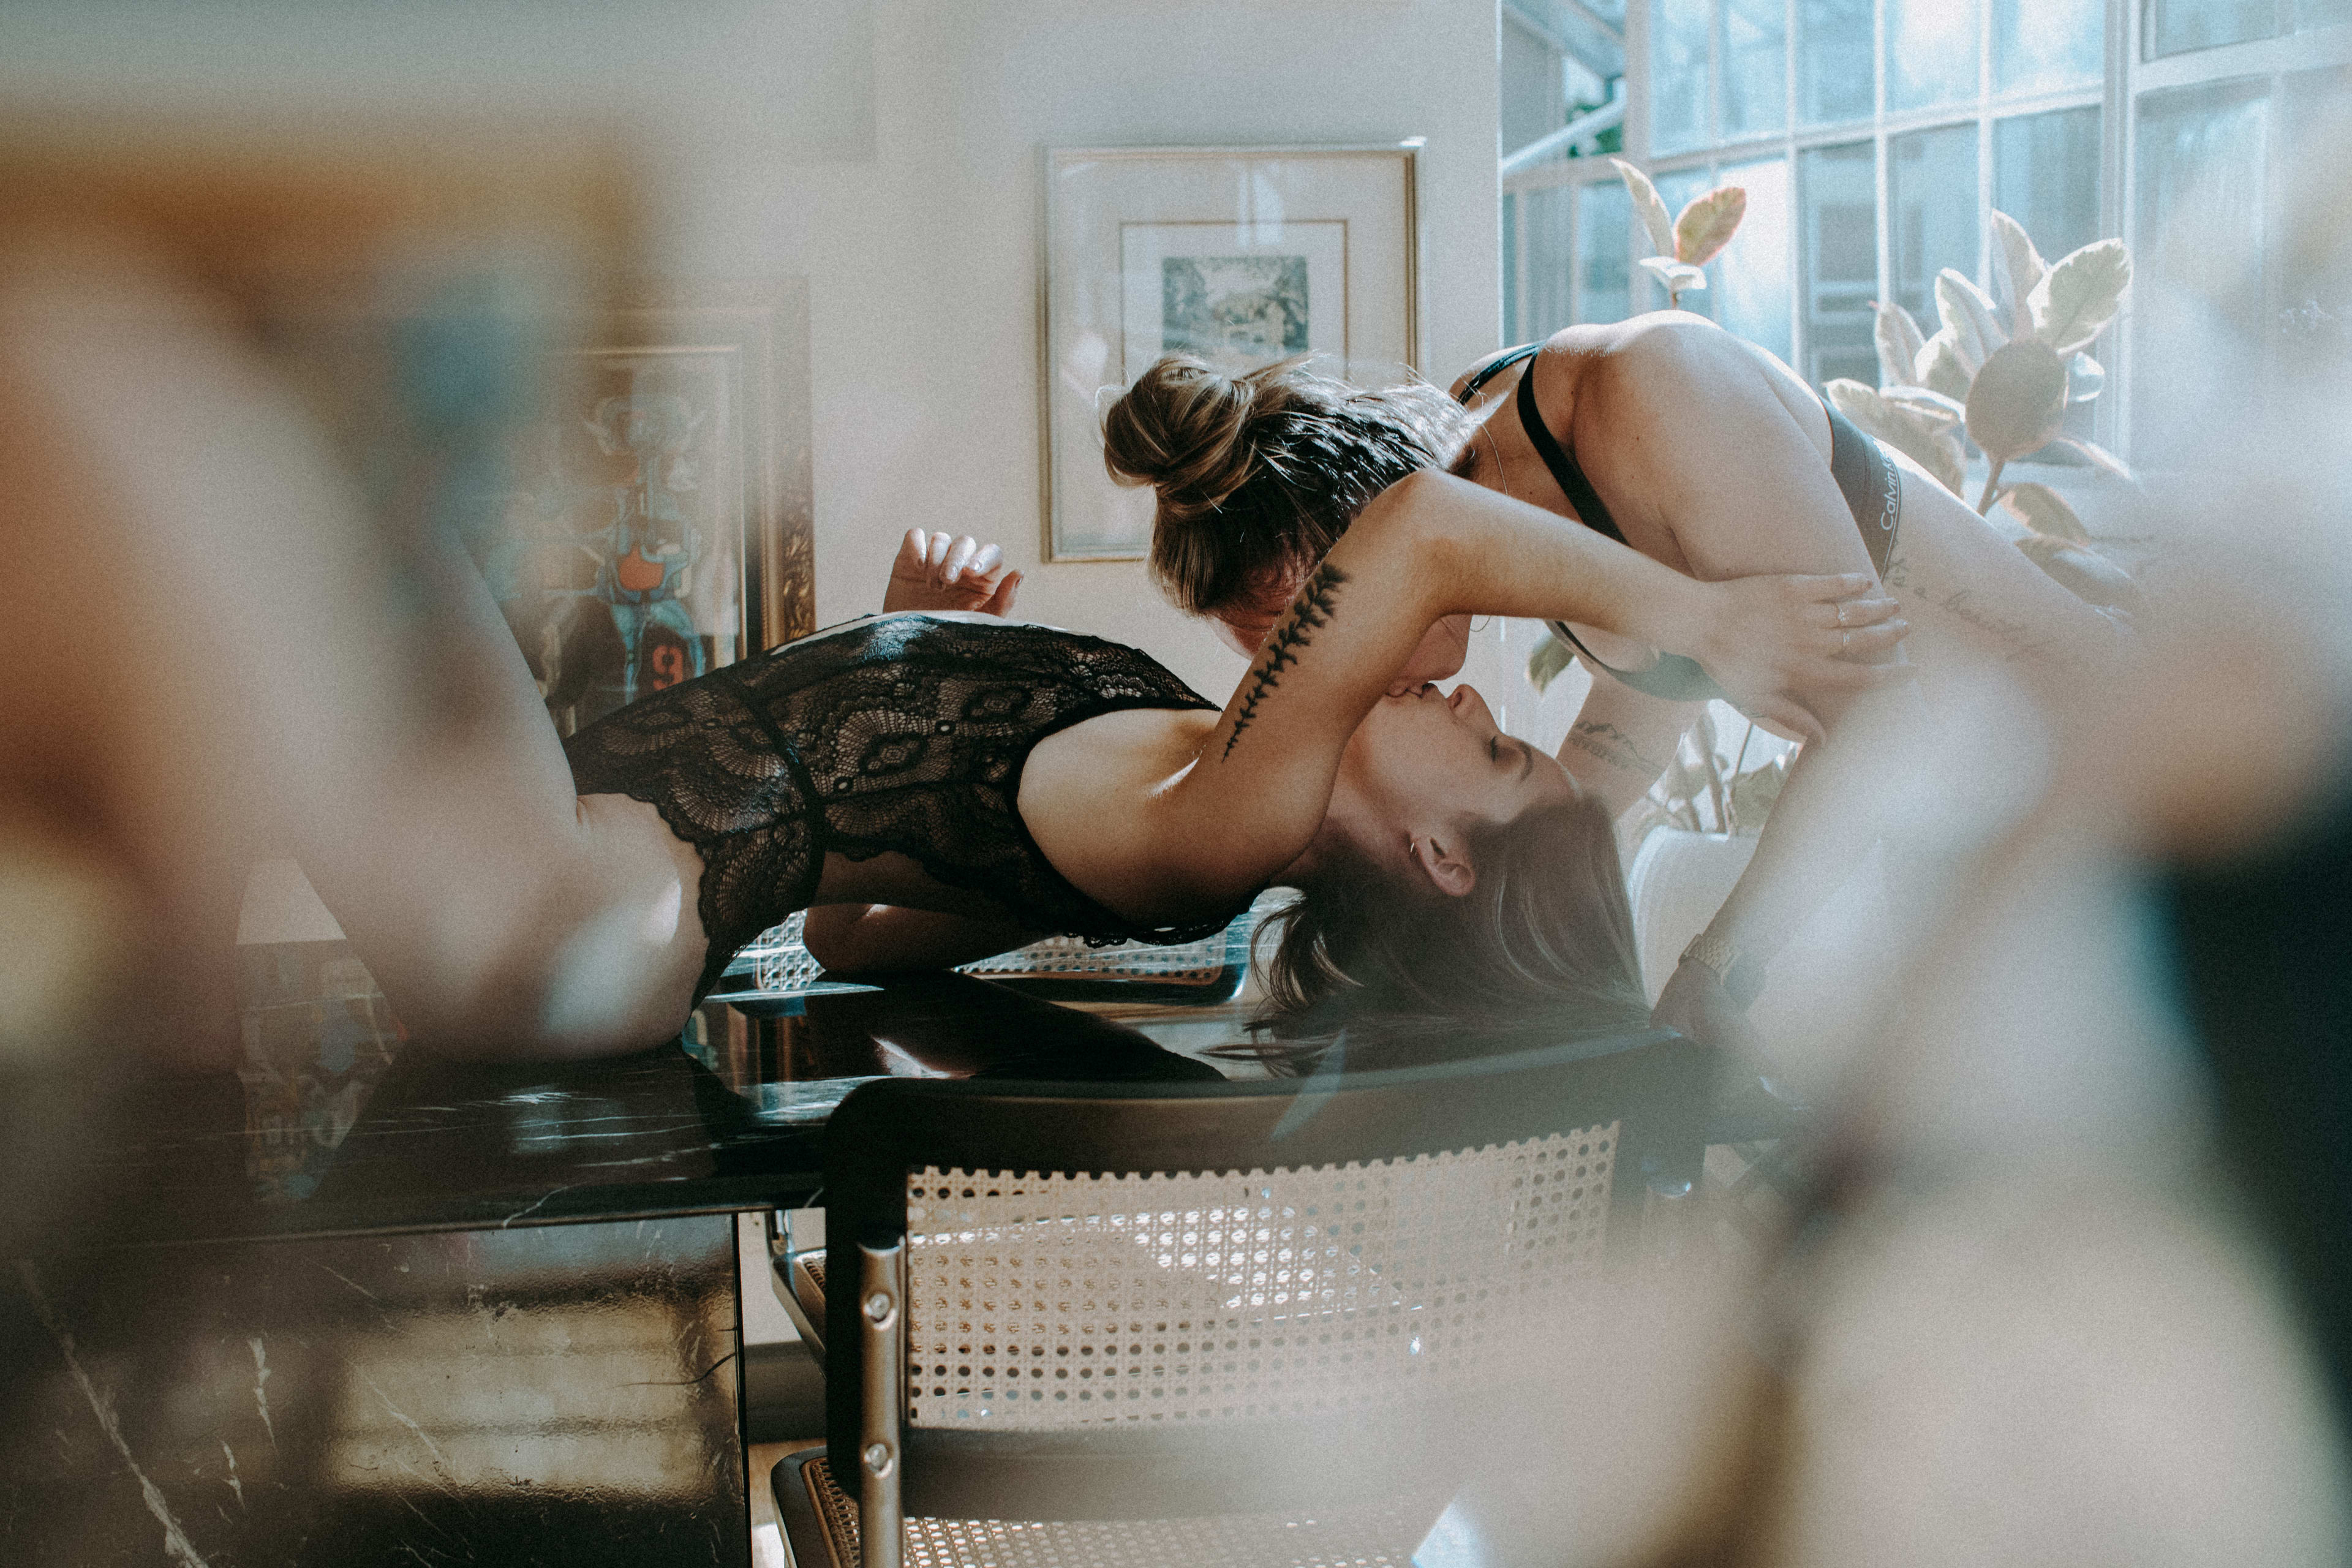 A photoshoot featuring a couple of women laying on top of a table wearing lingerie.